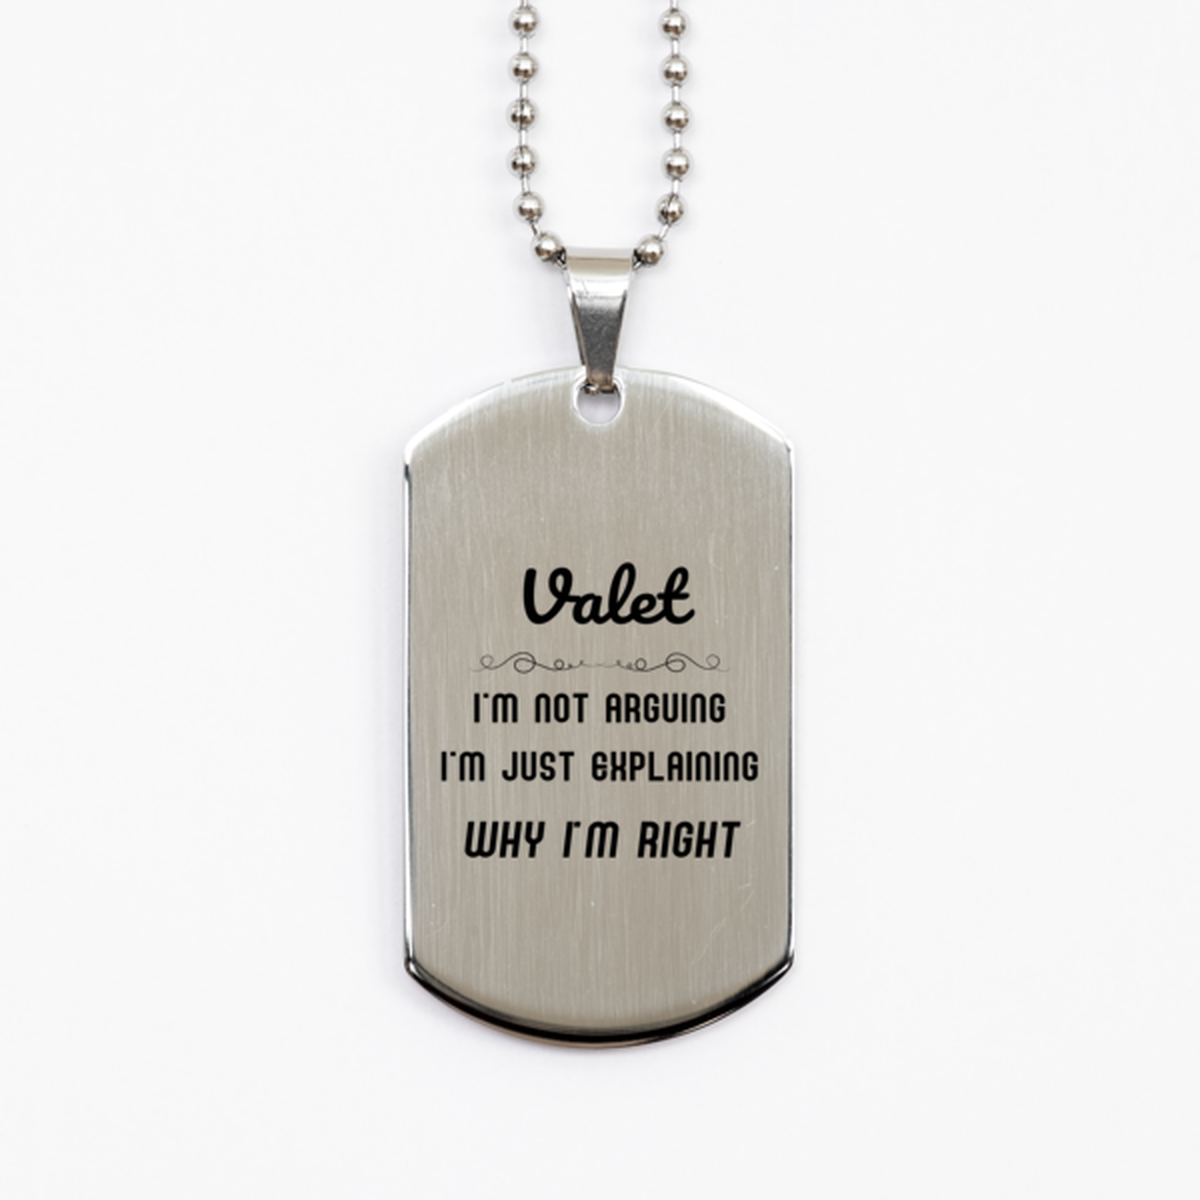 Valet I'm not Arguing. I'm Just Explaining Why I'm RIGHT Silver Dog Tag, Funny Saying Quote Valet Gifts For Valet Graduation Birthday Christmas Gifts for Men Women Coworker